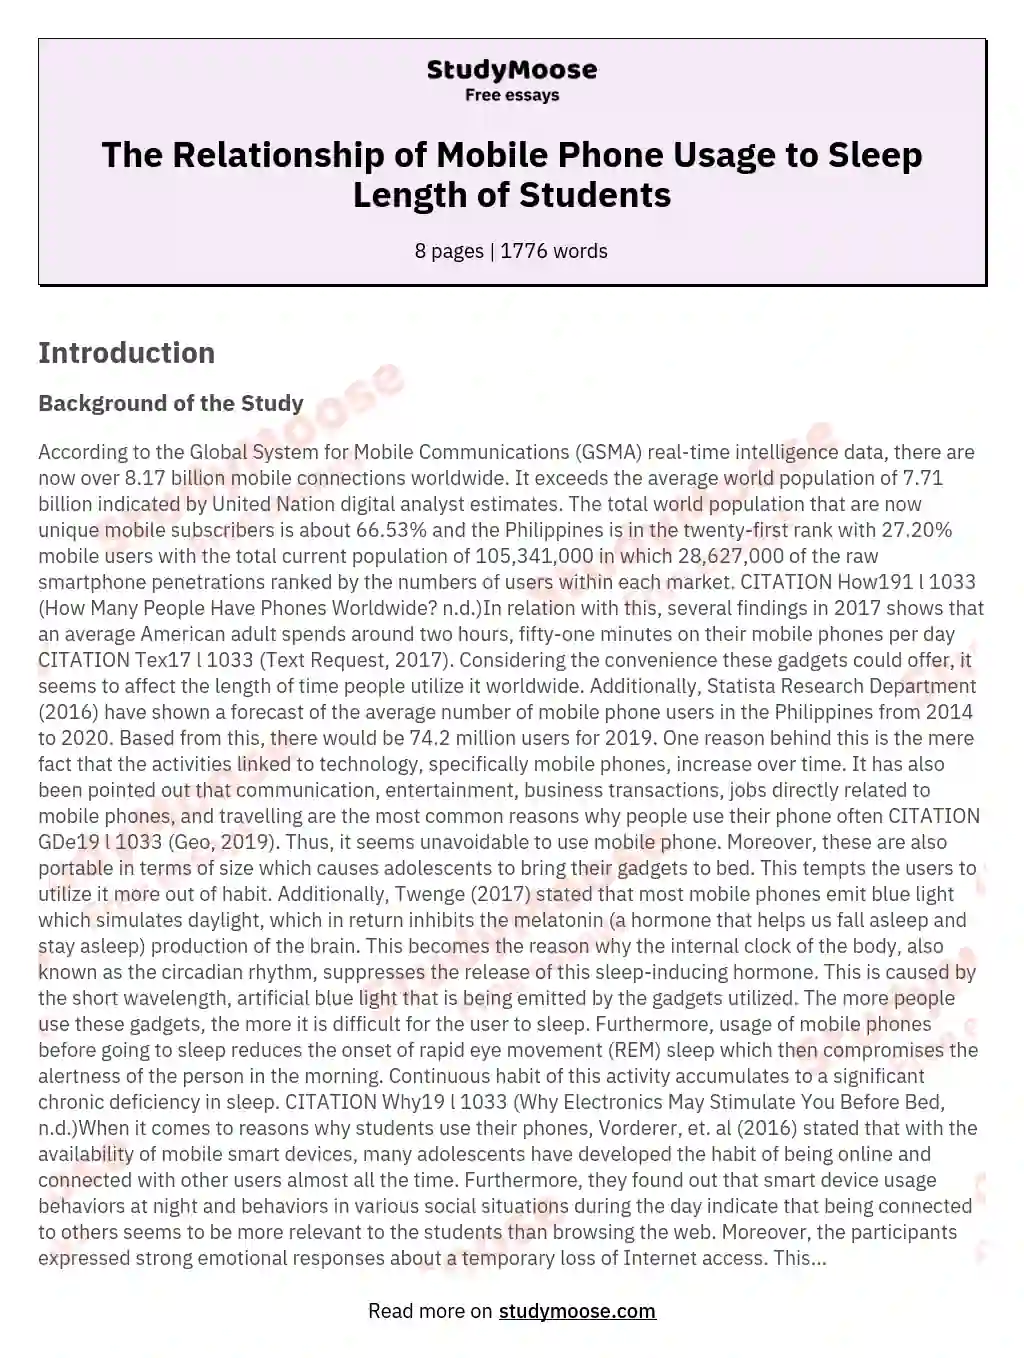 The Relationship of Mobile Phone Usage to Sleep Length of Students essay